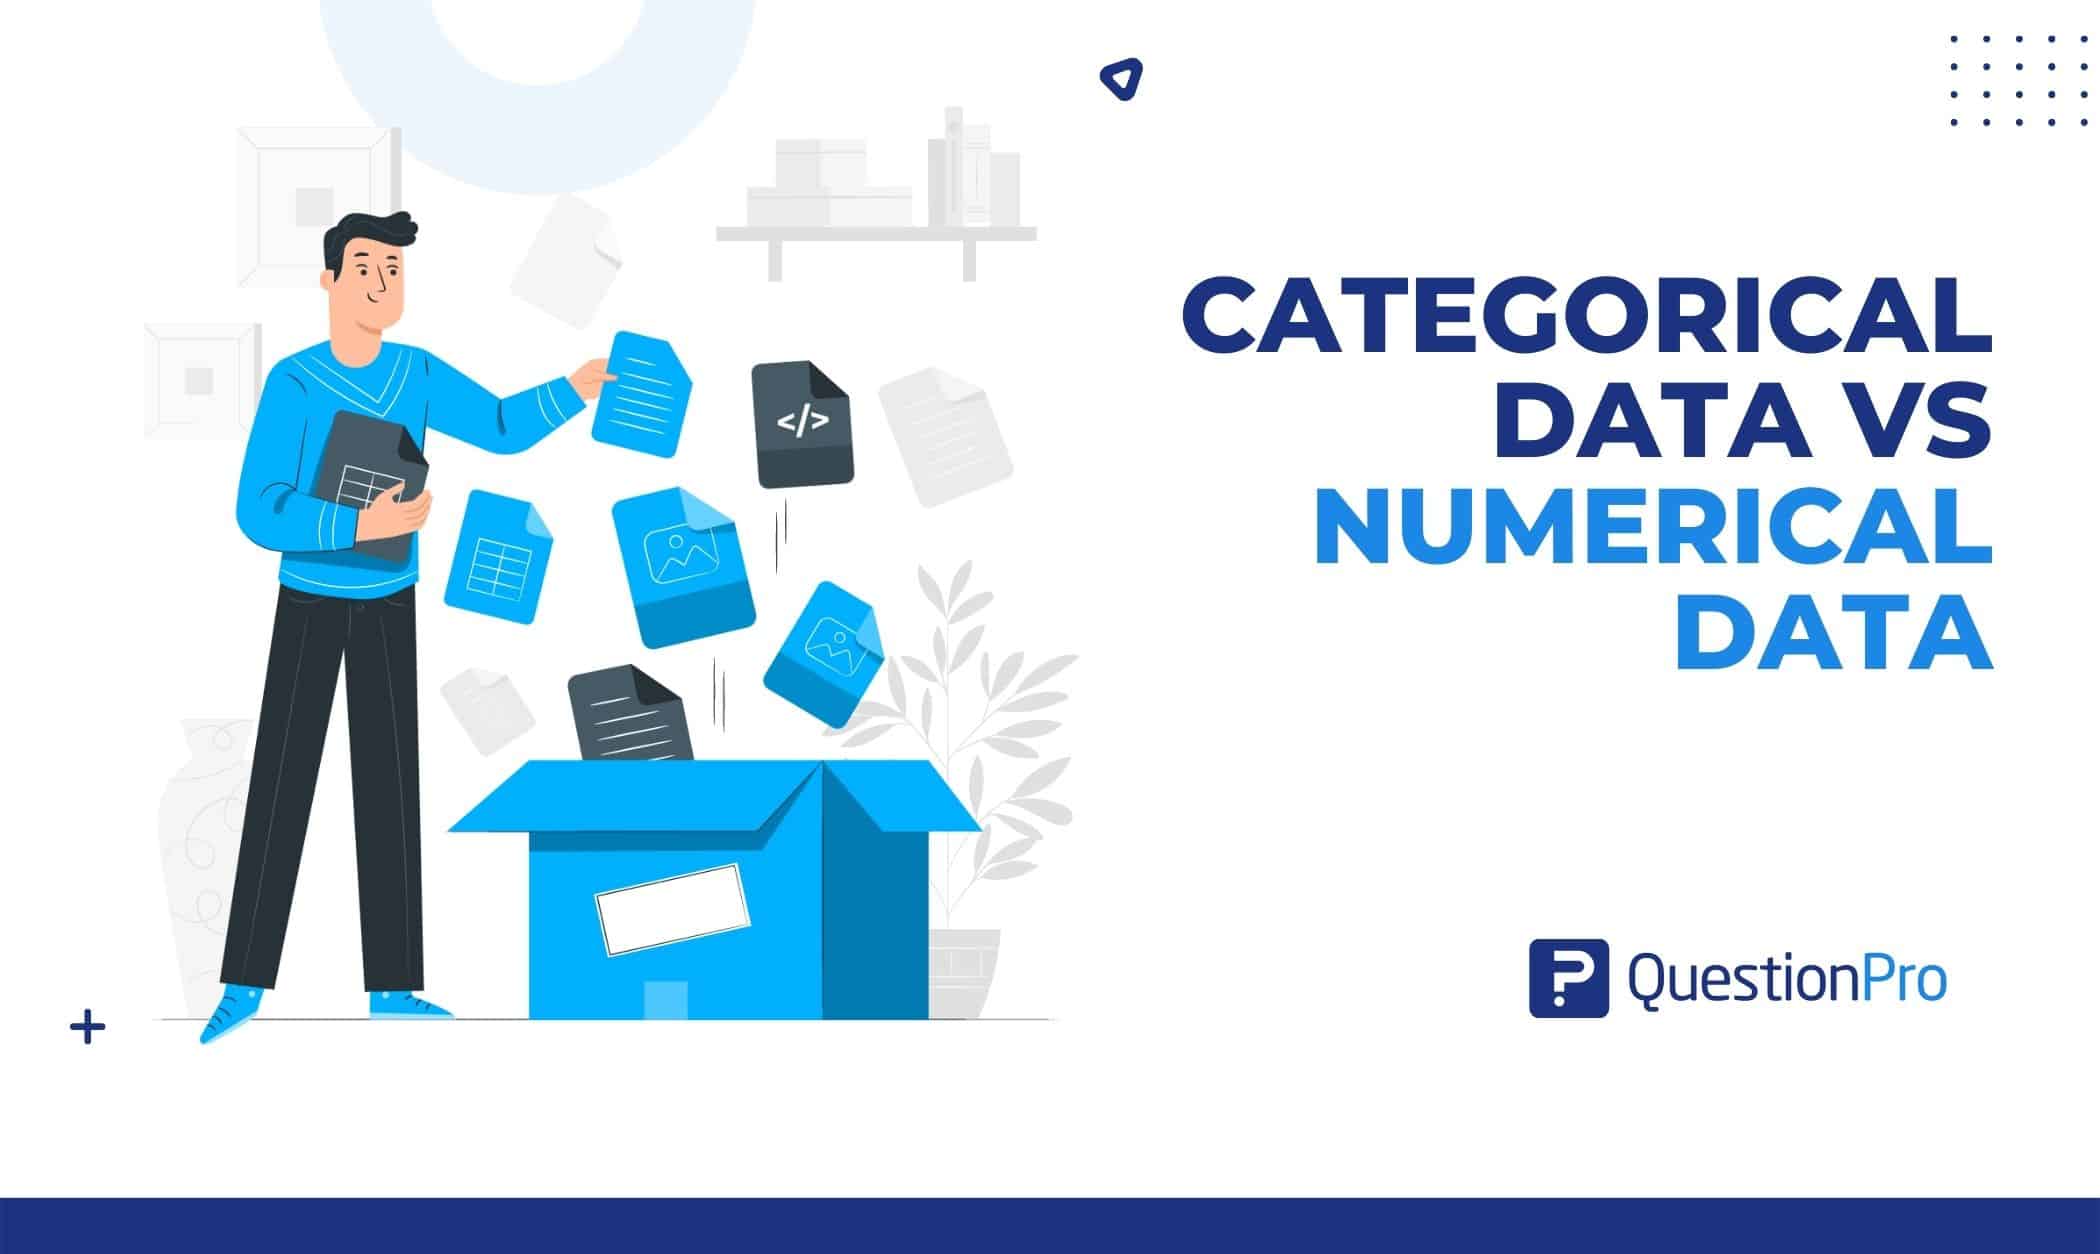 Data can have numerical values for numerical and categorical data. It is easier to grasp. Let's explore categorical data vs numerical data.